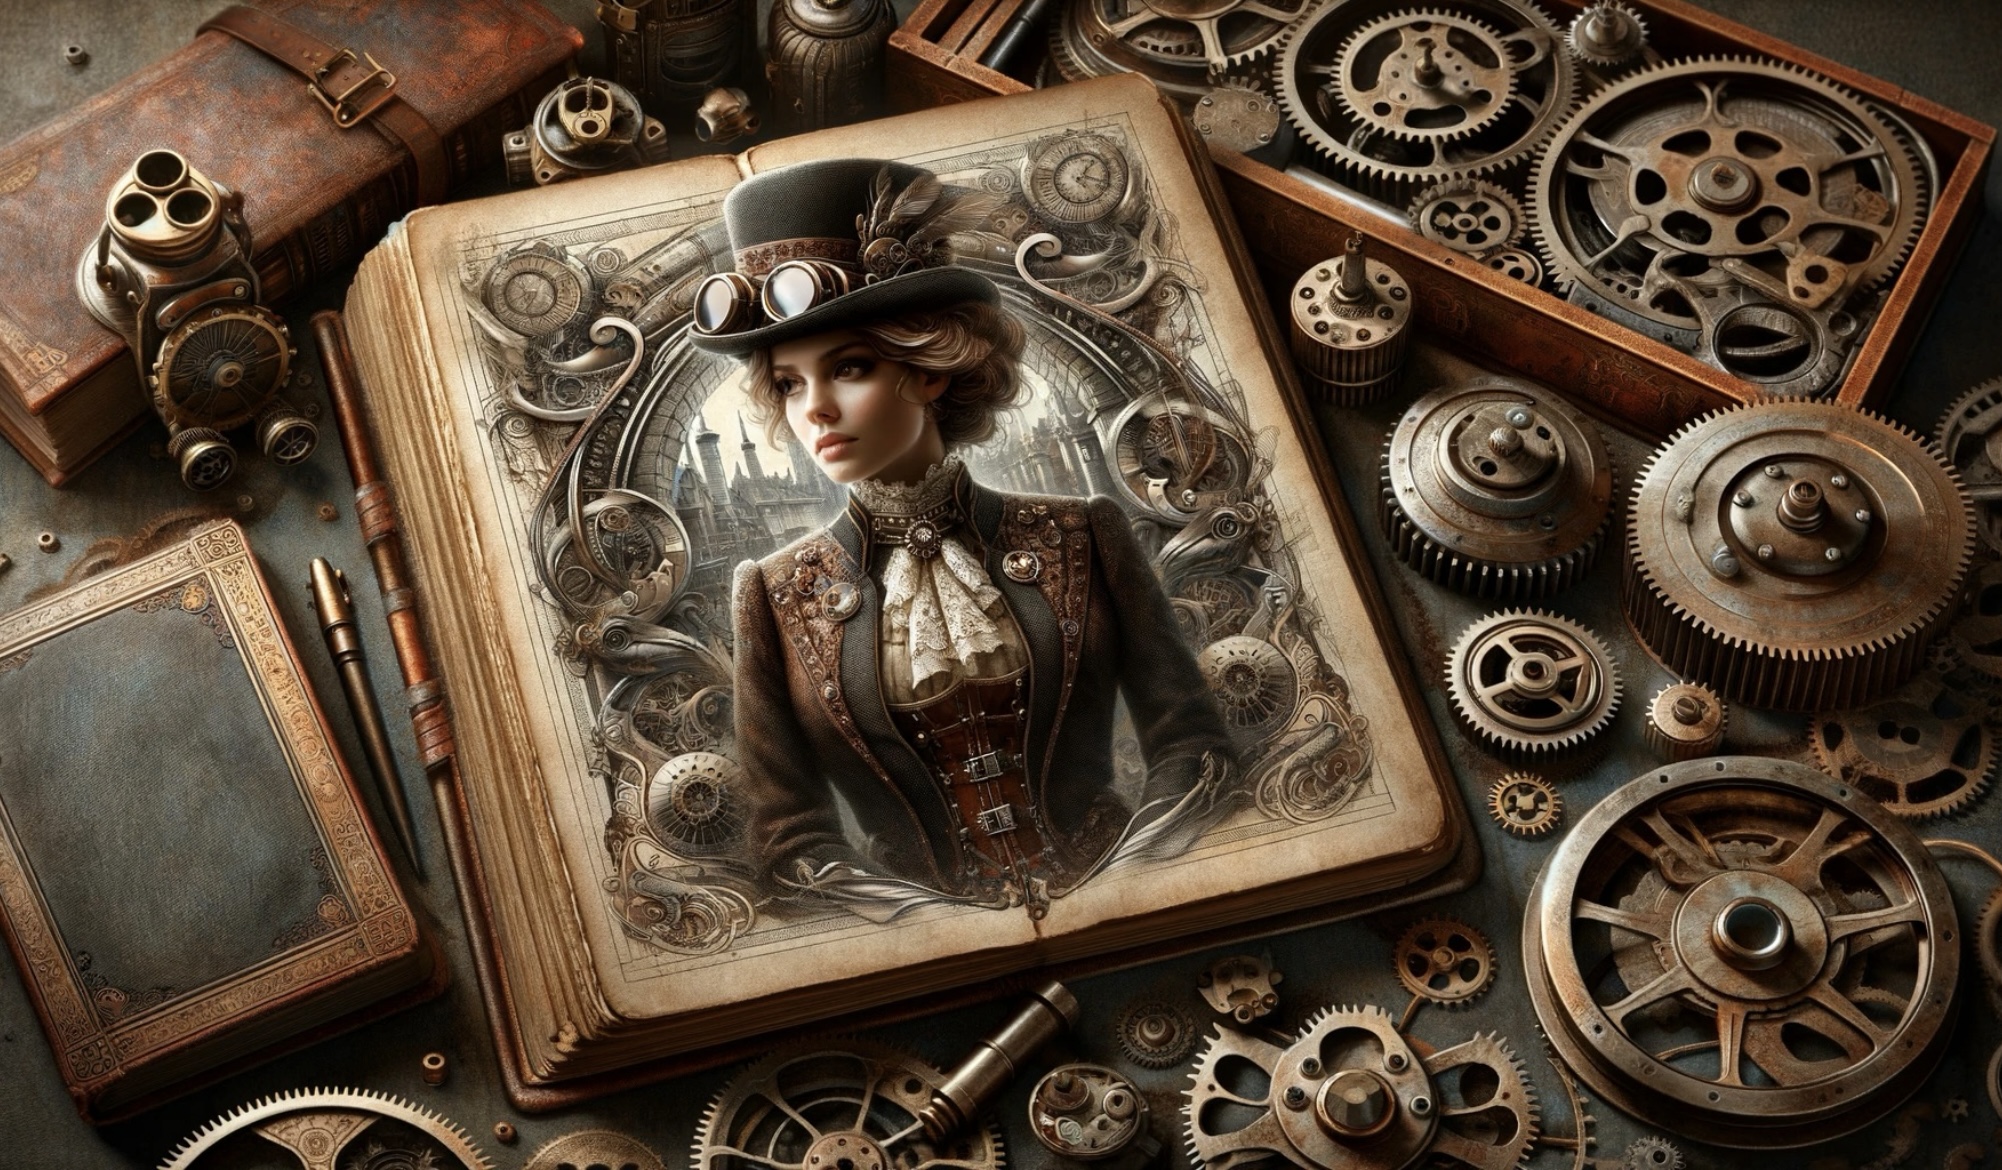 The Steampunk Genre: What is Steampunk and Why It Fascinates